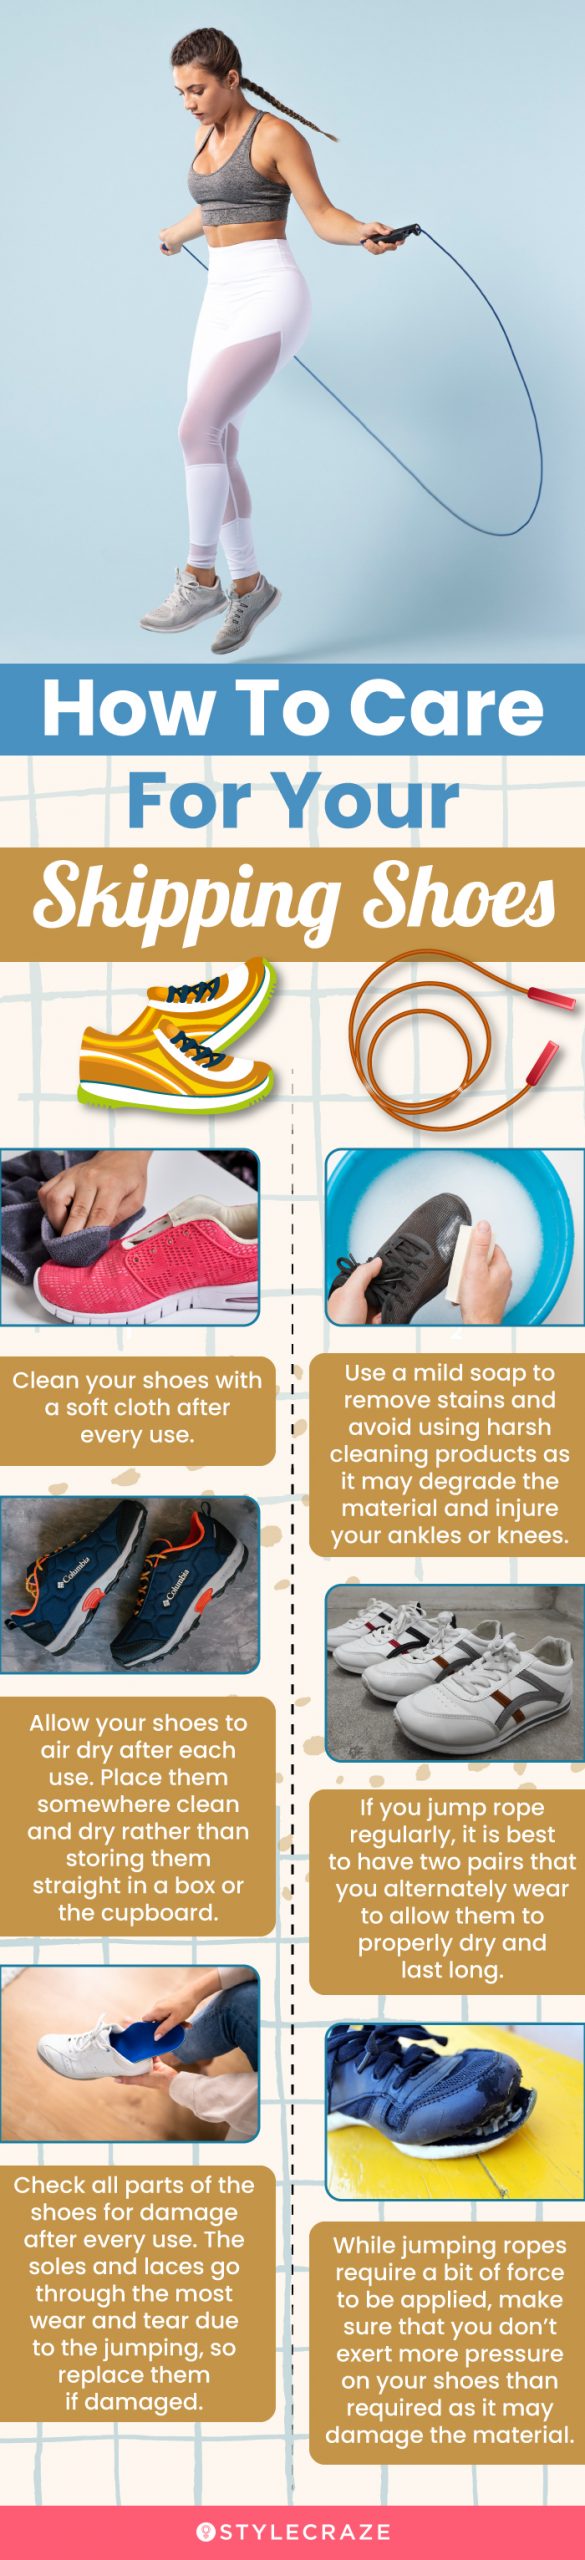 How To Care For Your Skipping Shoes (infographic)